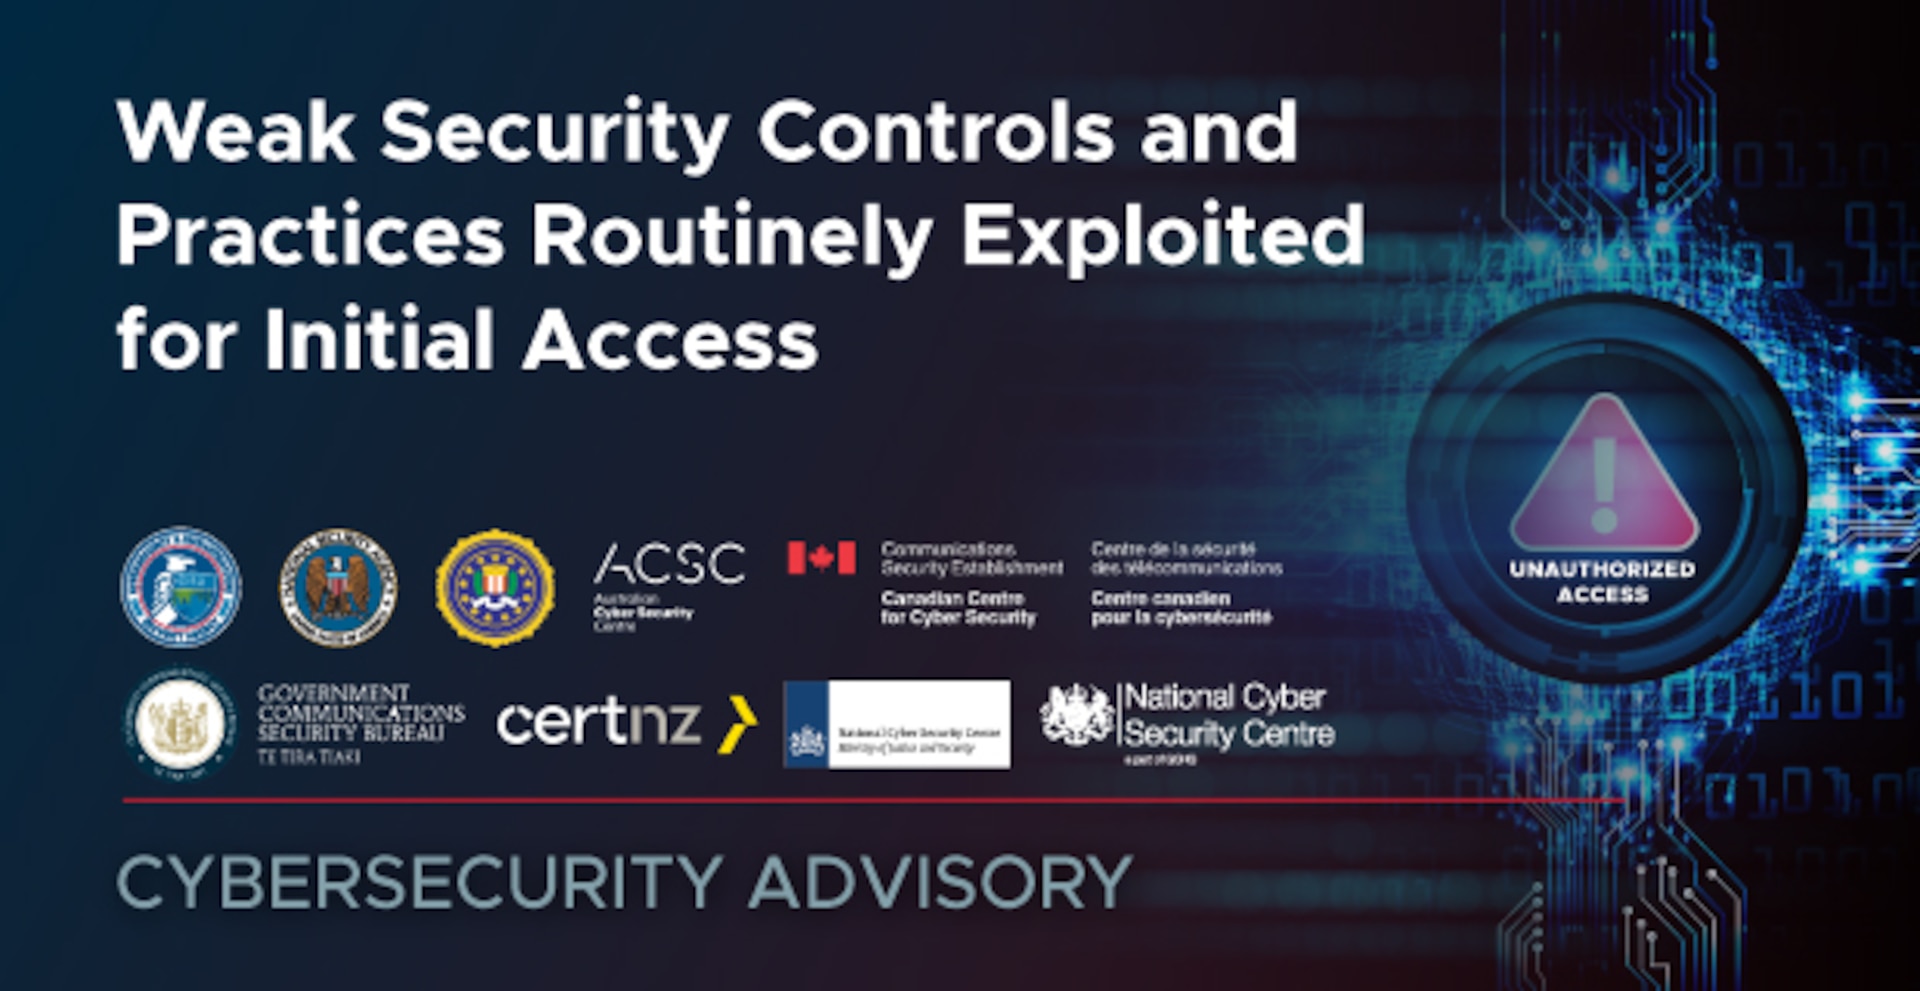 CSA: Weak Security Controls and Practices Routinely Exploited for Initial Access